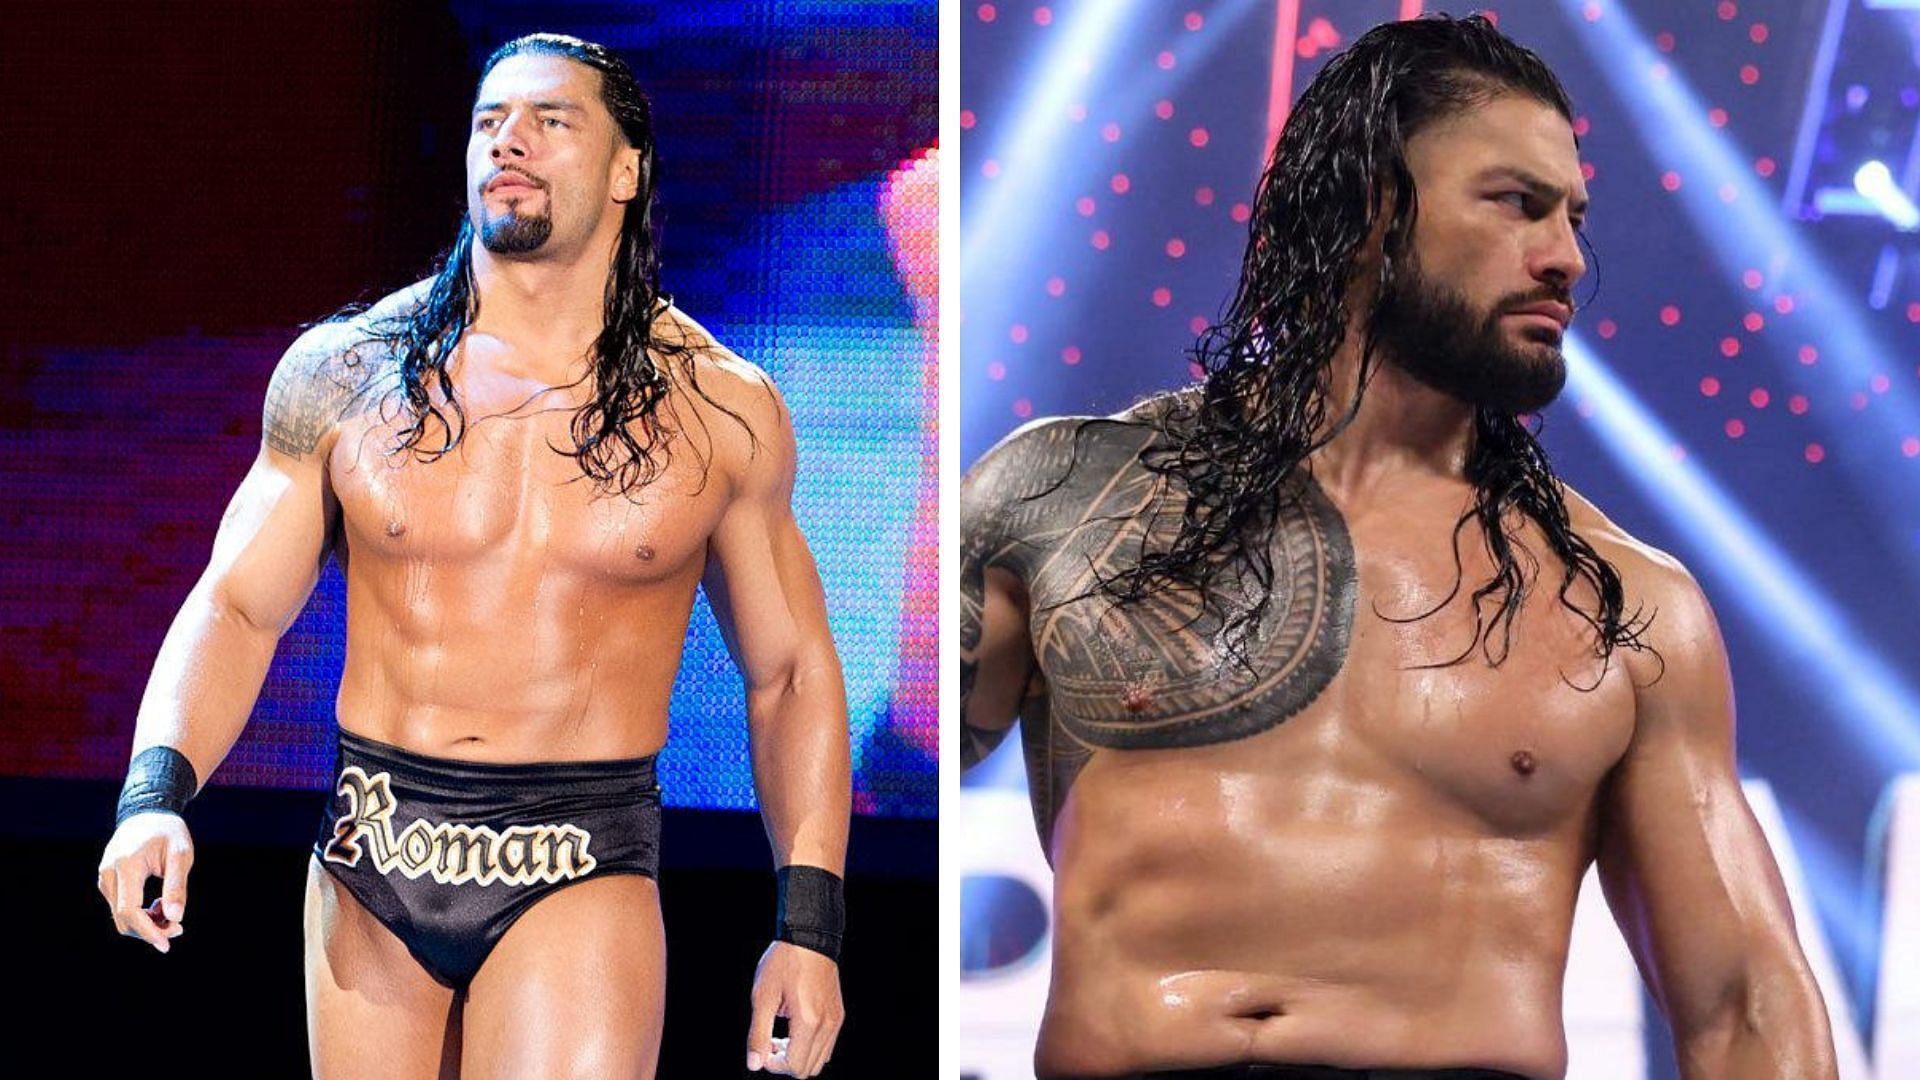 Roman Reigns has evolved over the last decade.